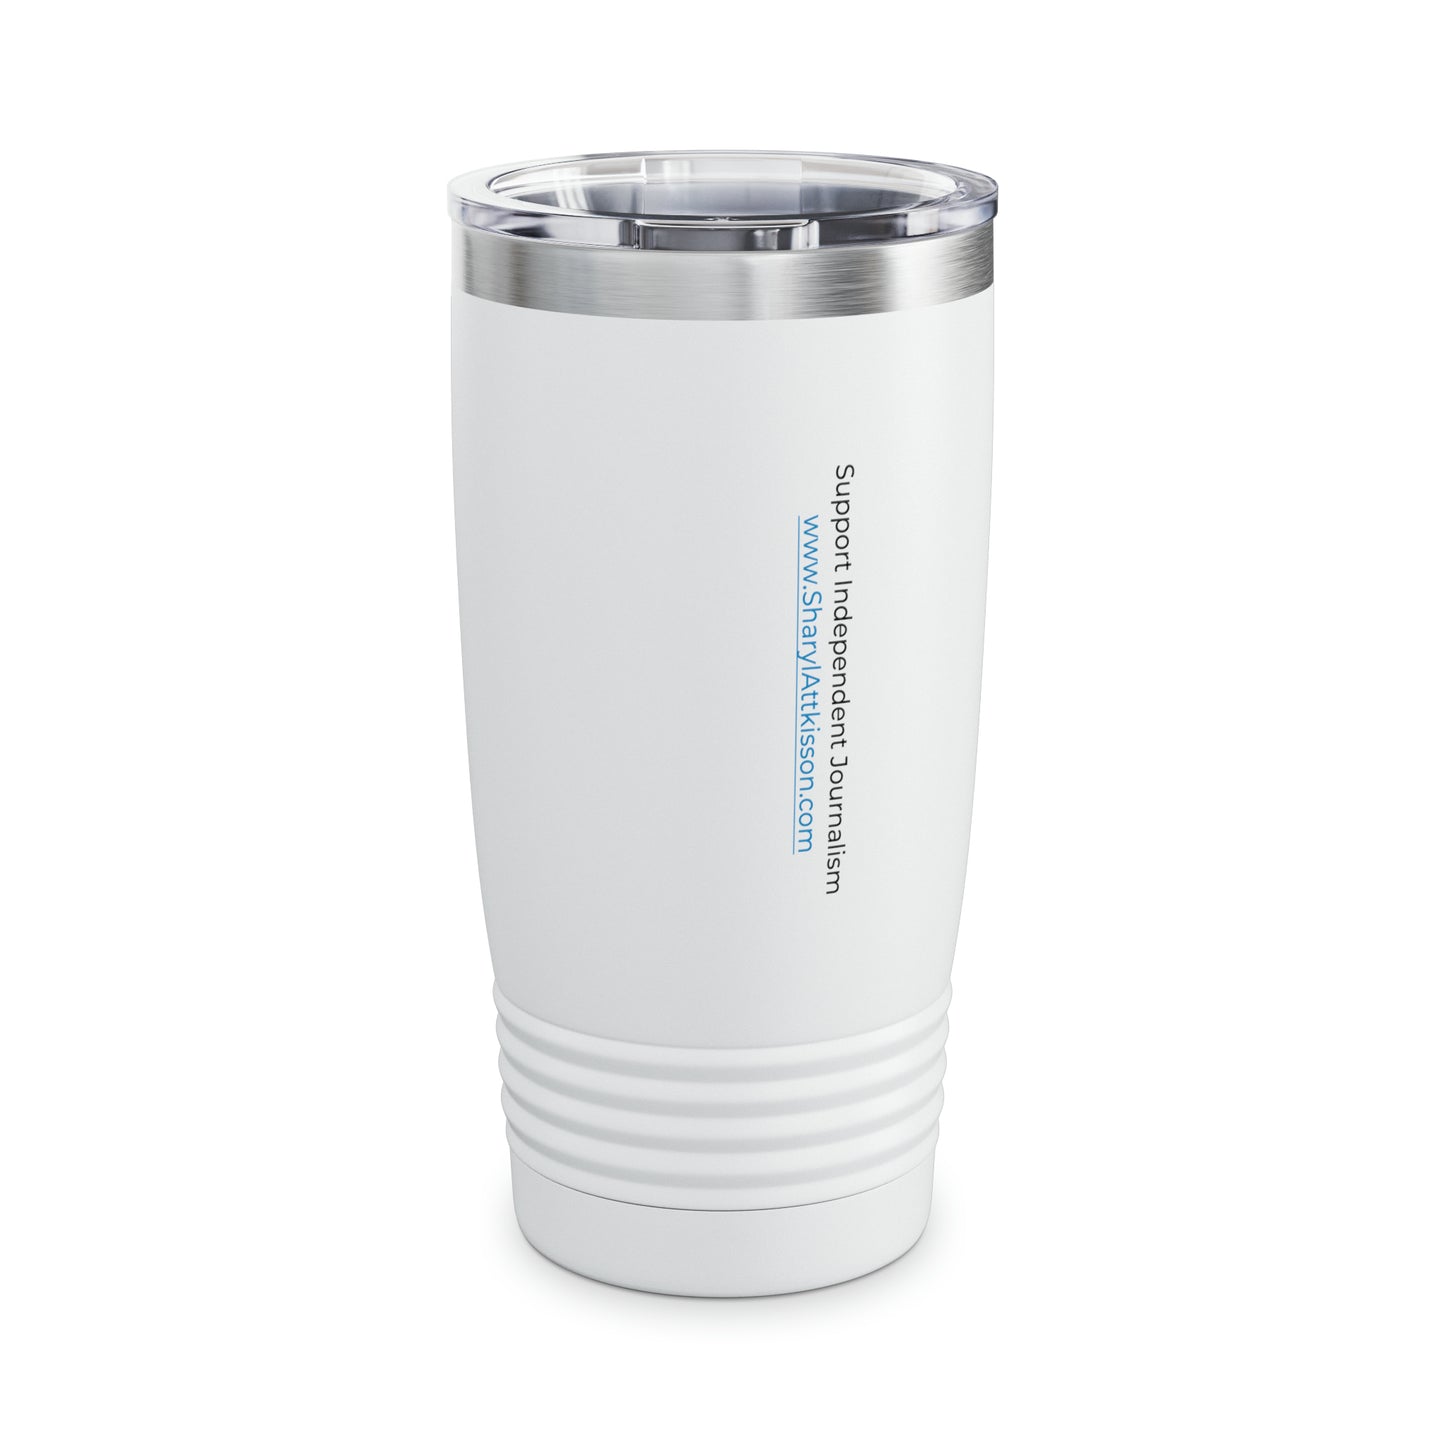 'Think for Yourself' Tumbler (Steel or White)